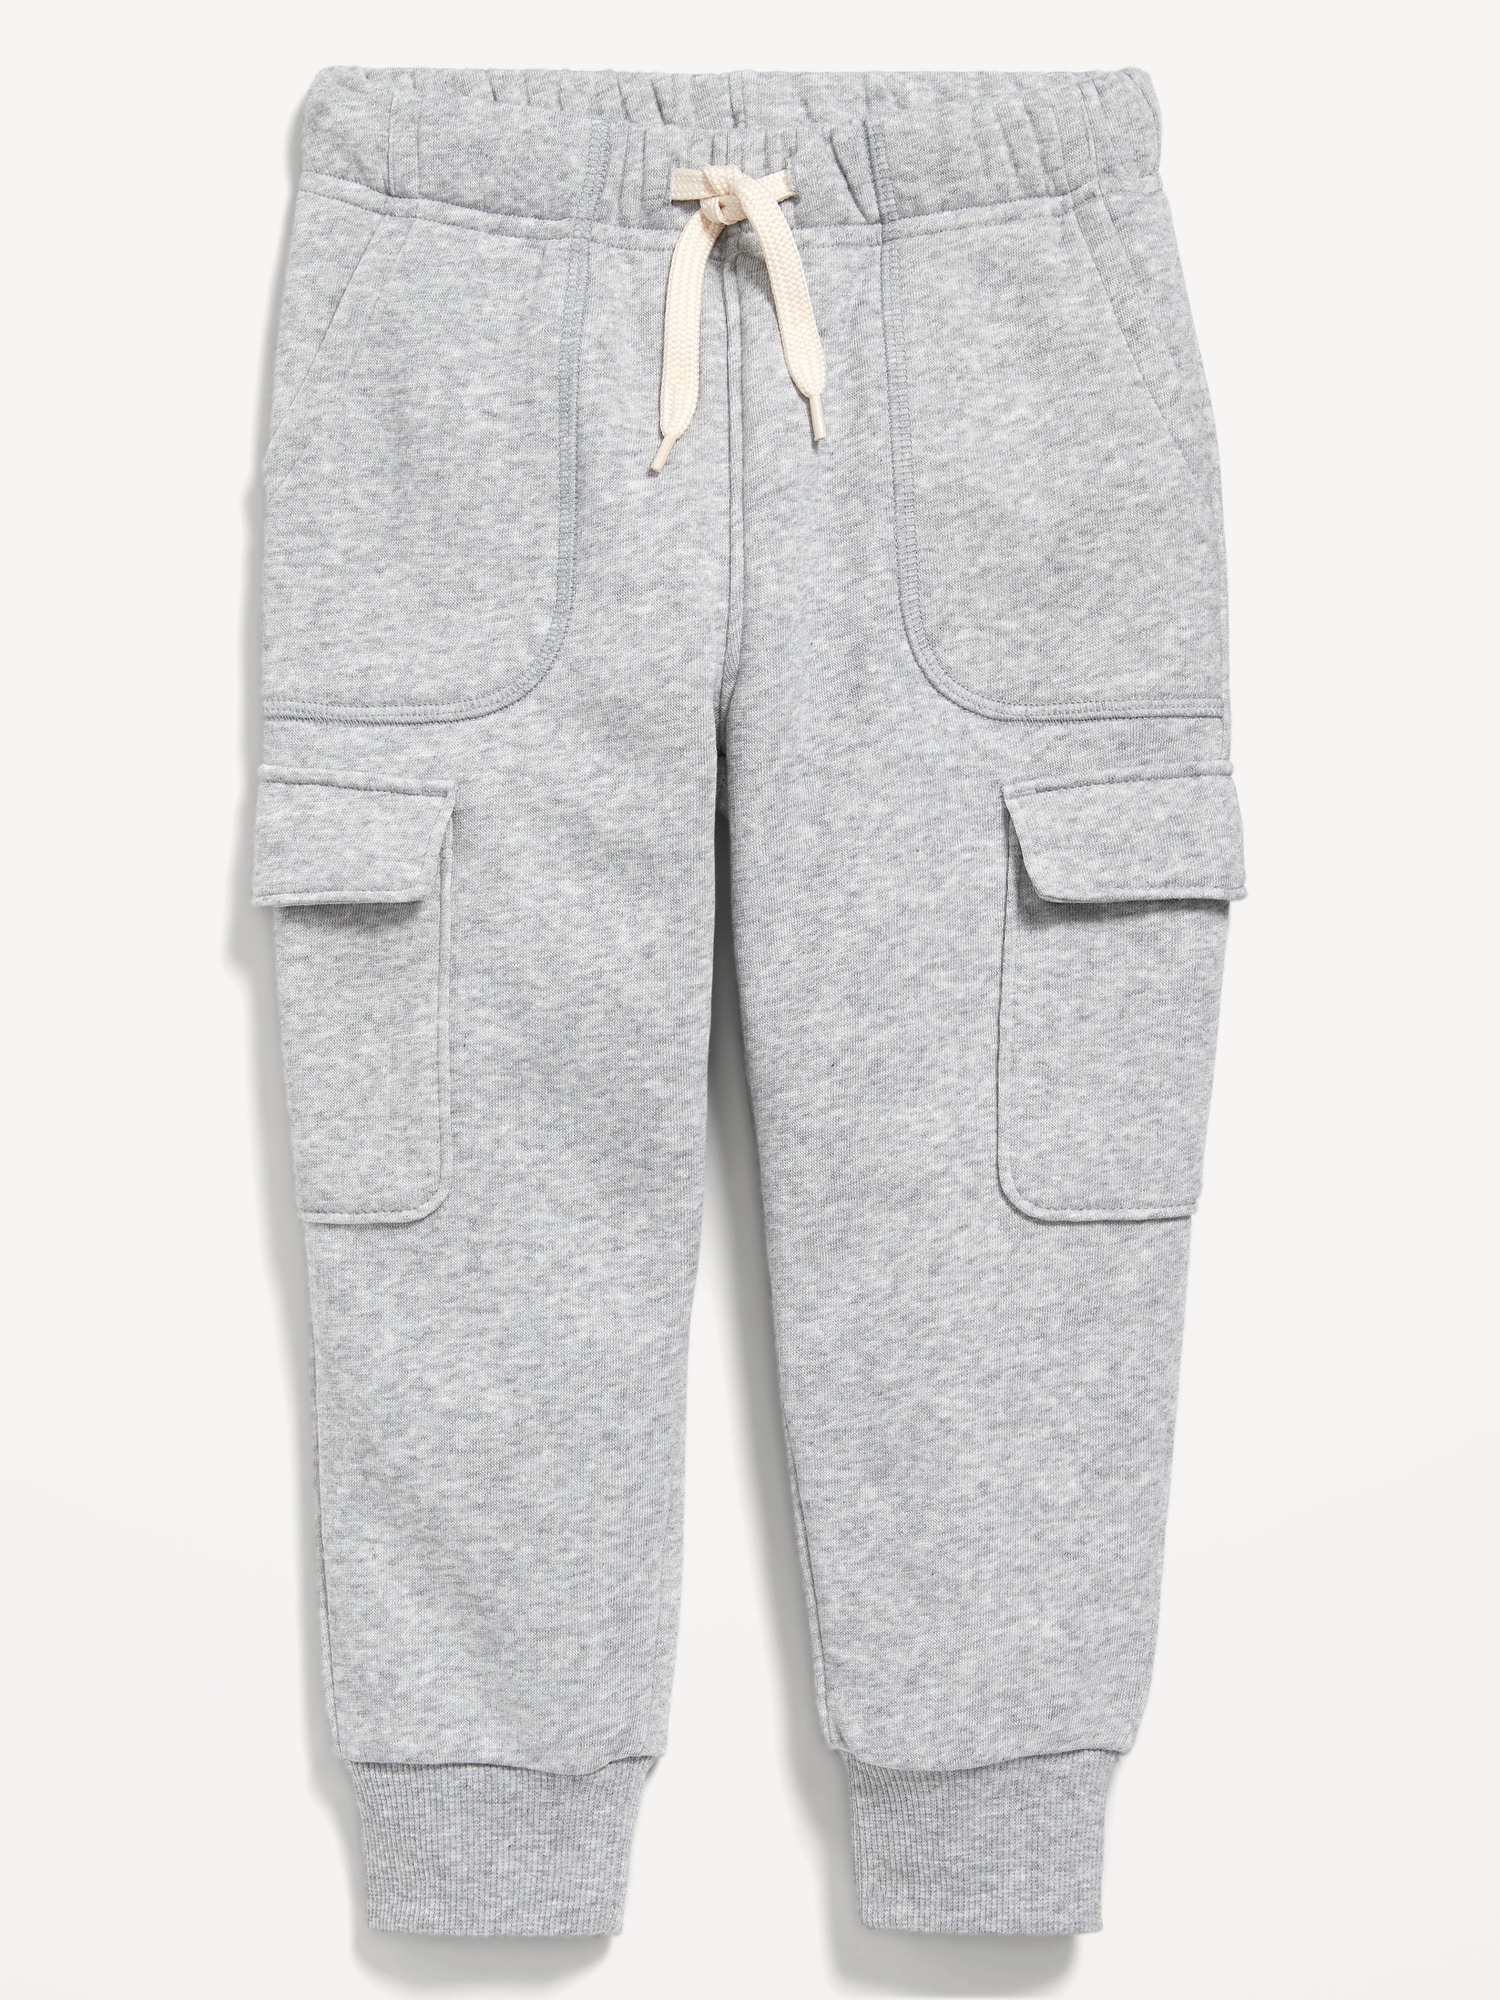 Unisex Functional Drawstring Cargo Jogger Sweatpants for Toddler | Old Navy